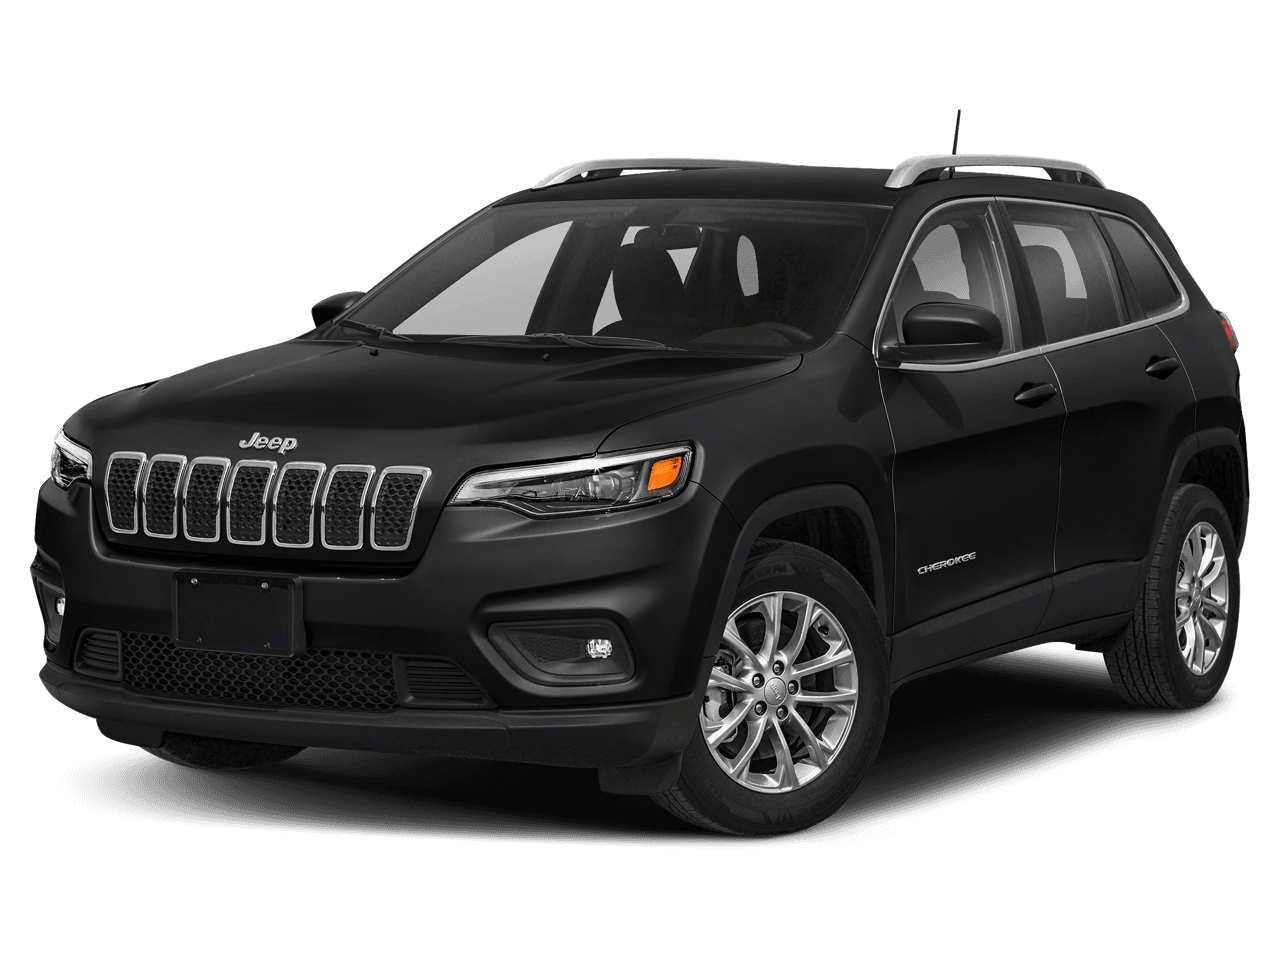 2020 Jeep Cherokee Photo in Wooster, OH 44691